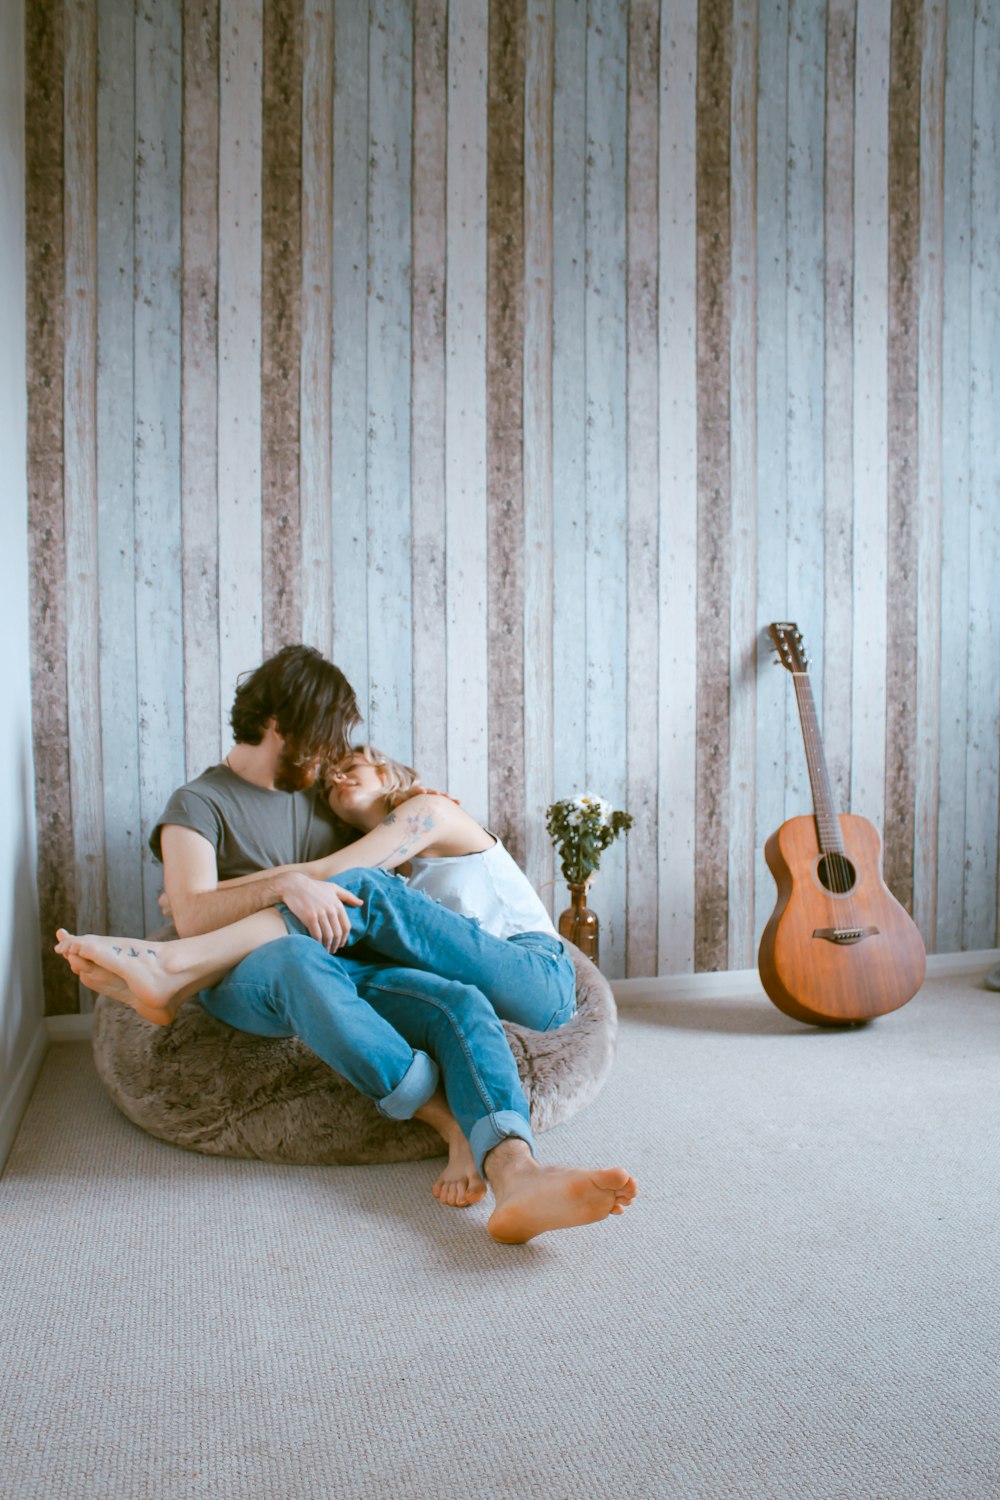 A barefooted man and woman cuddle on a beanbag chair against wood paneling, near a guitar